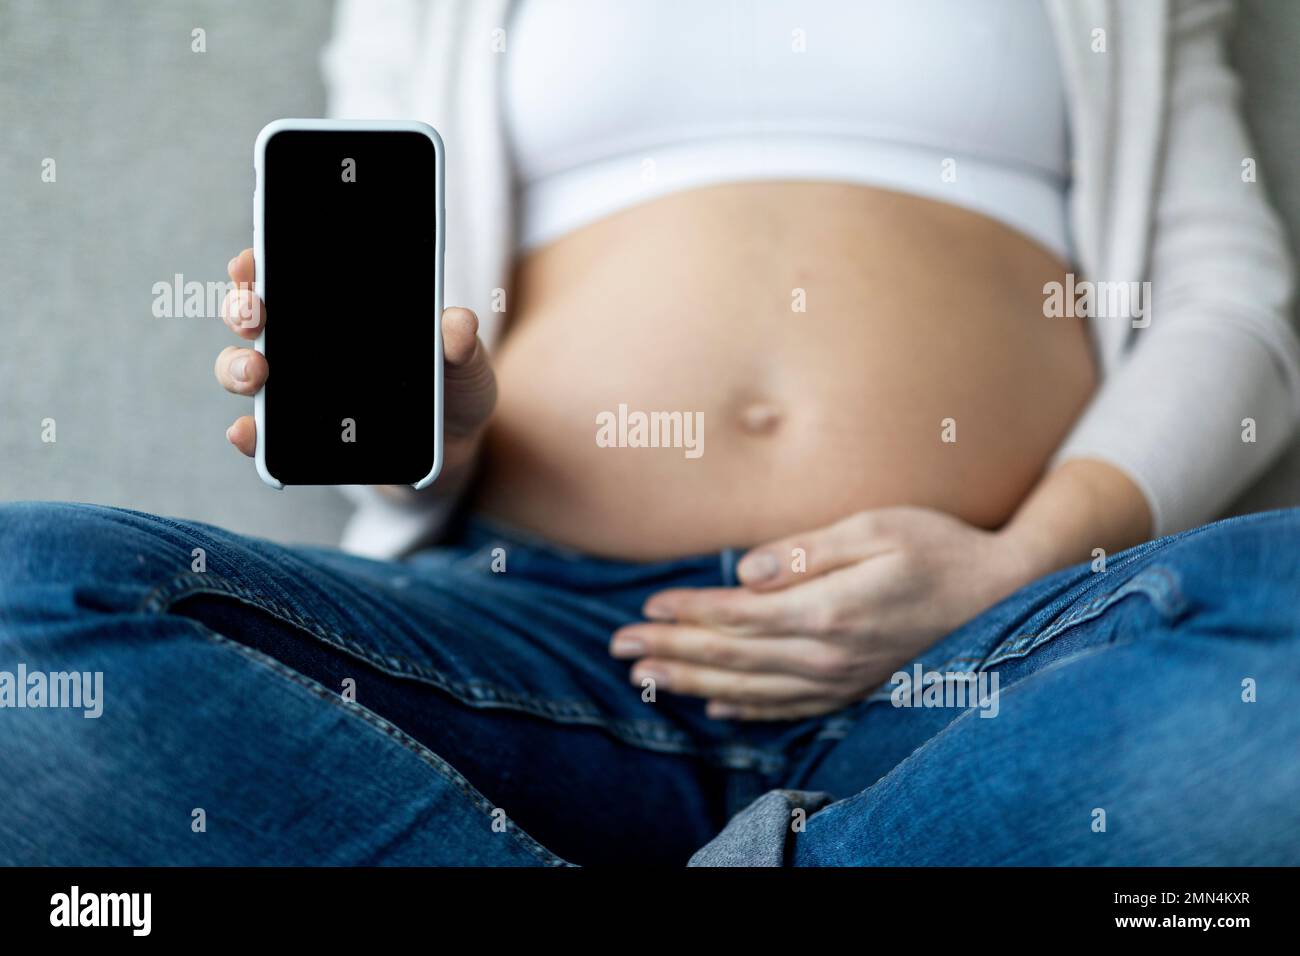 Unrecognizable Pregnant Woman Showing Blank Smartphone And Embracing Belly At Home Stock Photo